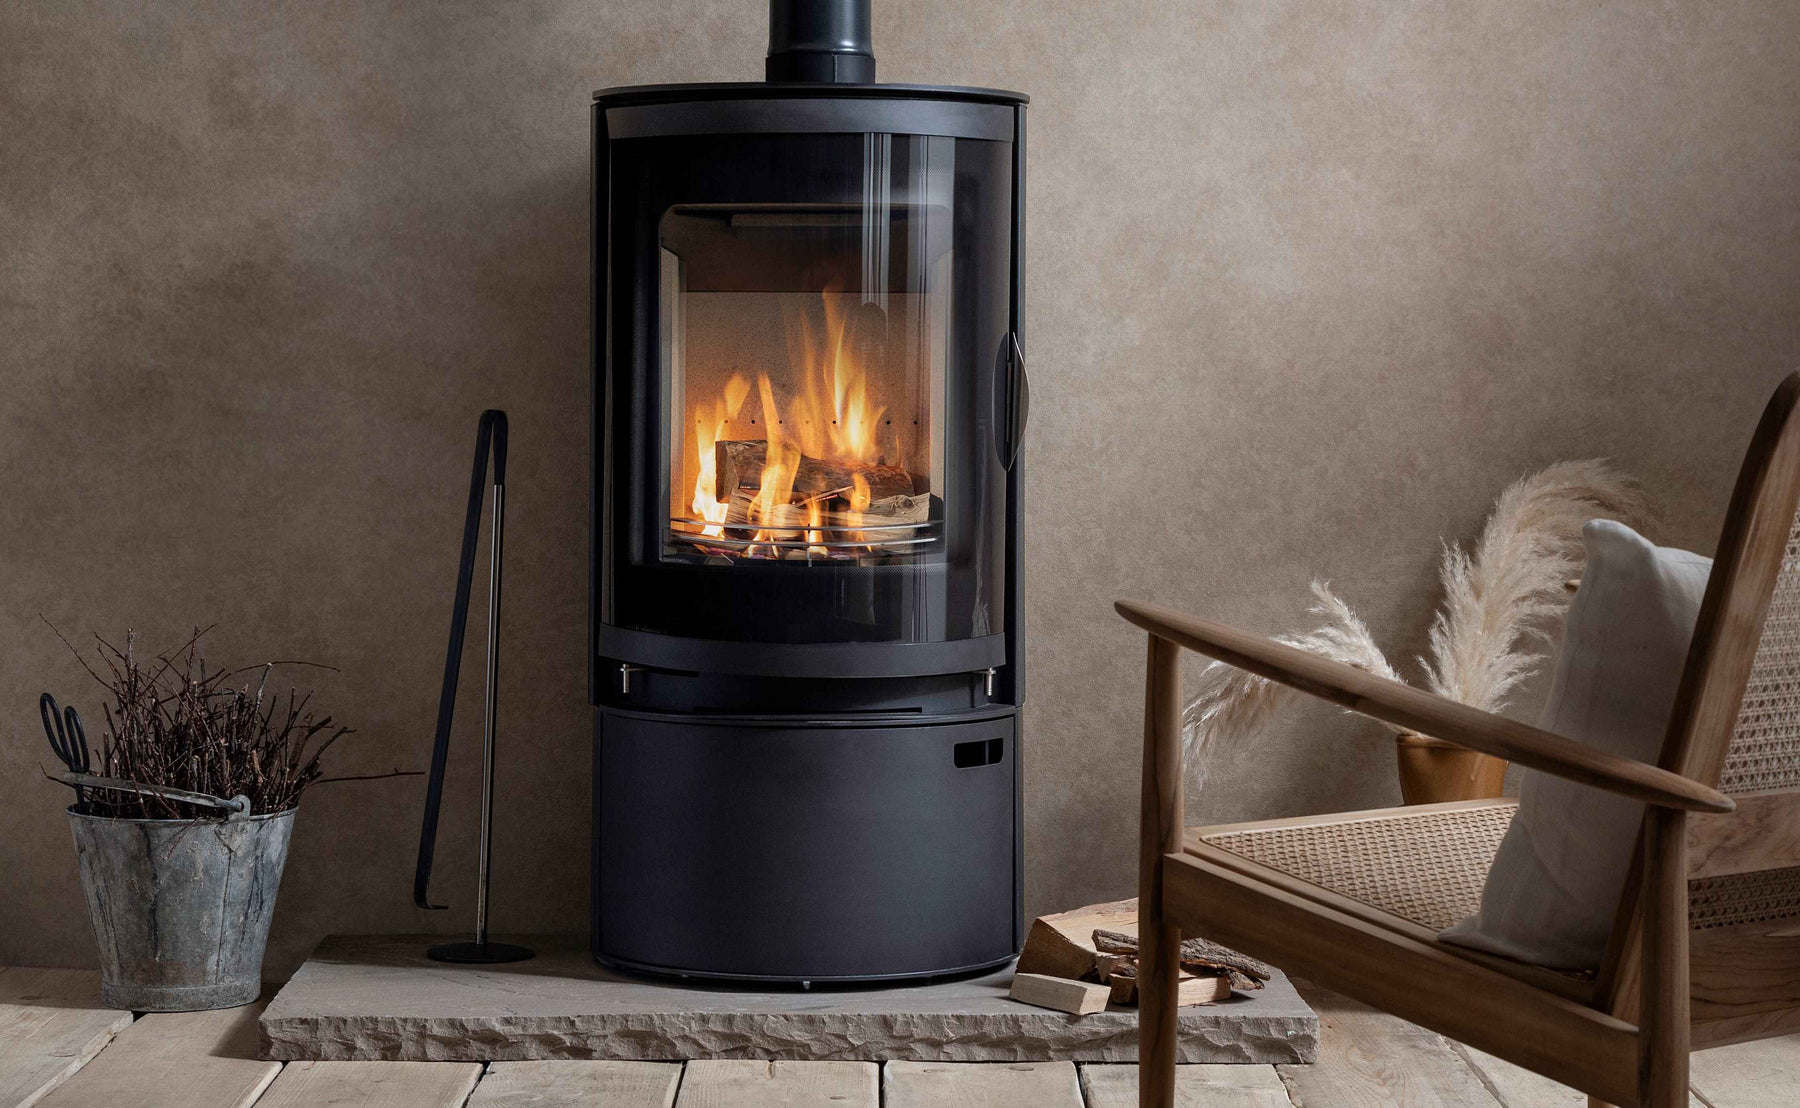 Find the Best Wood-Burning Stove Manufacturer for your Style and Budget